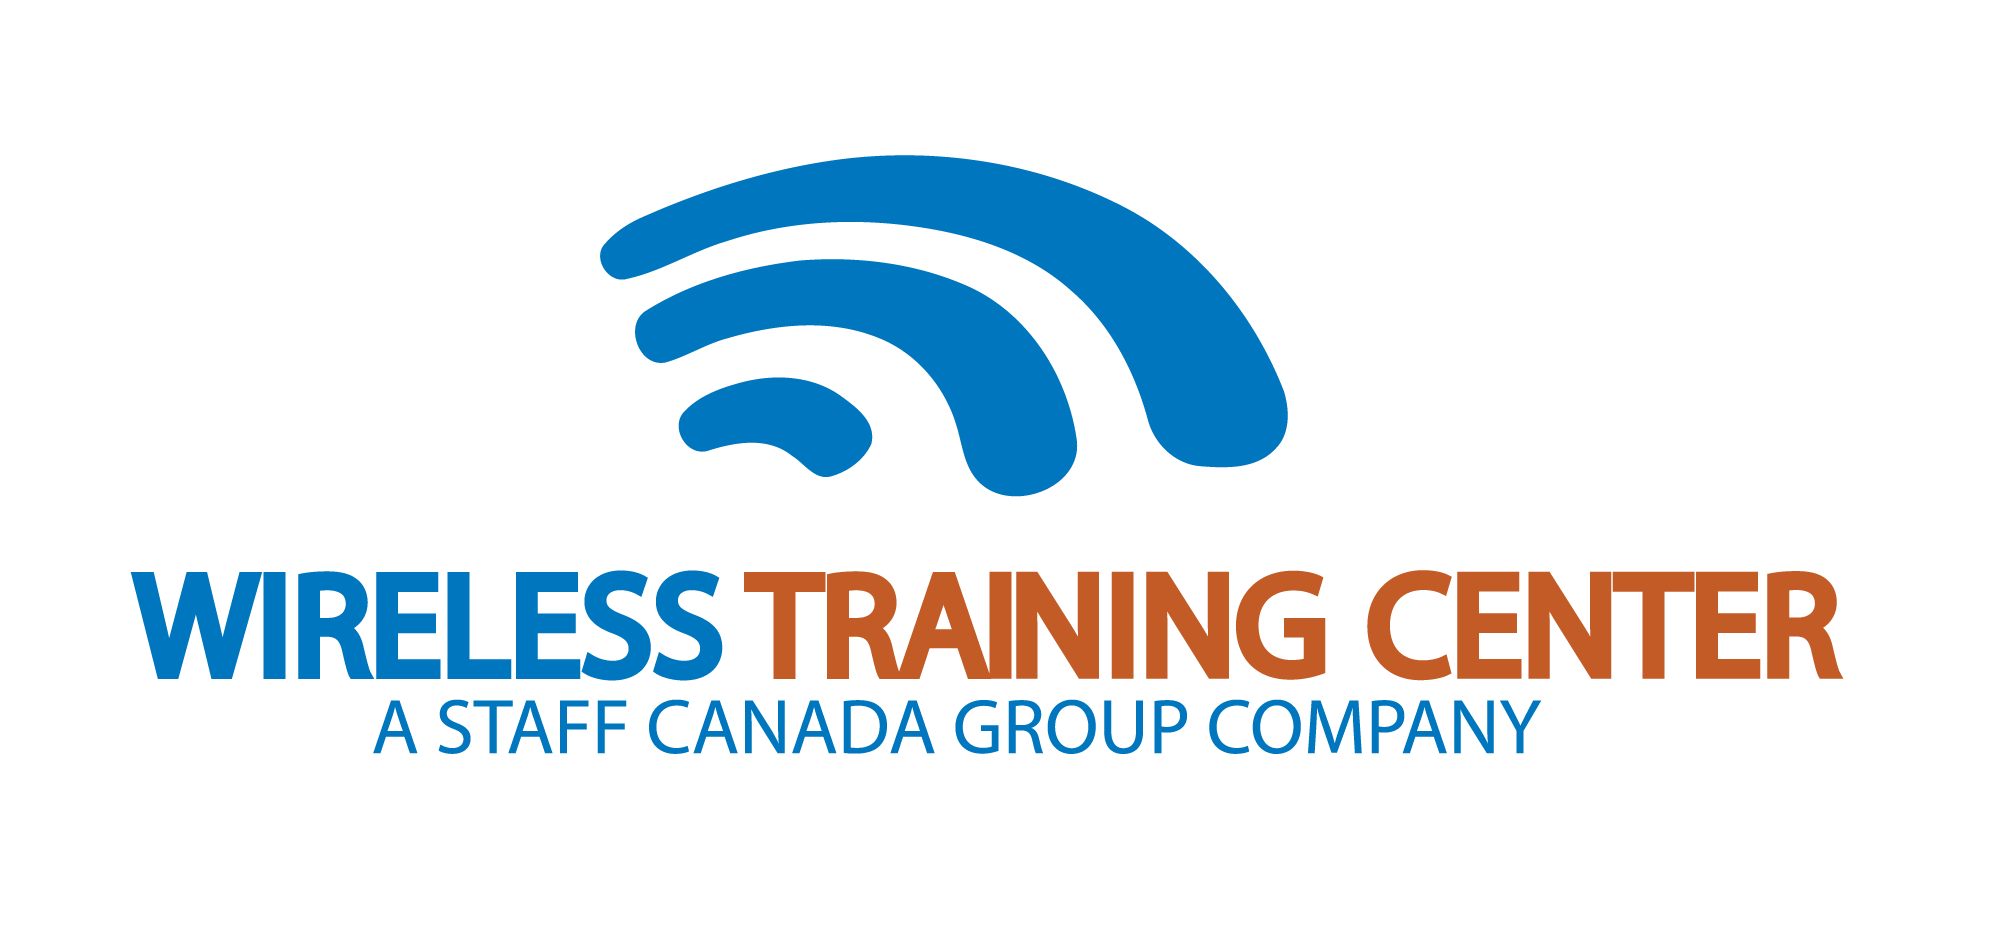 More about Wireless Training Center